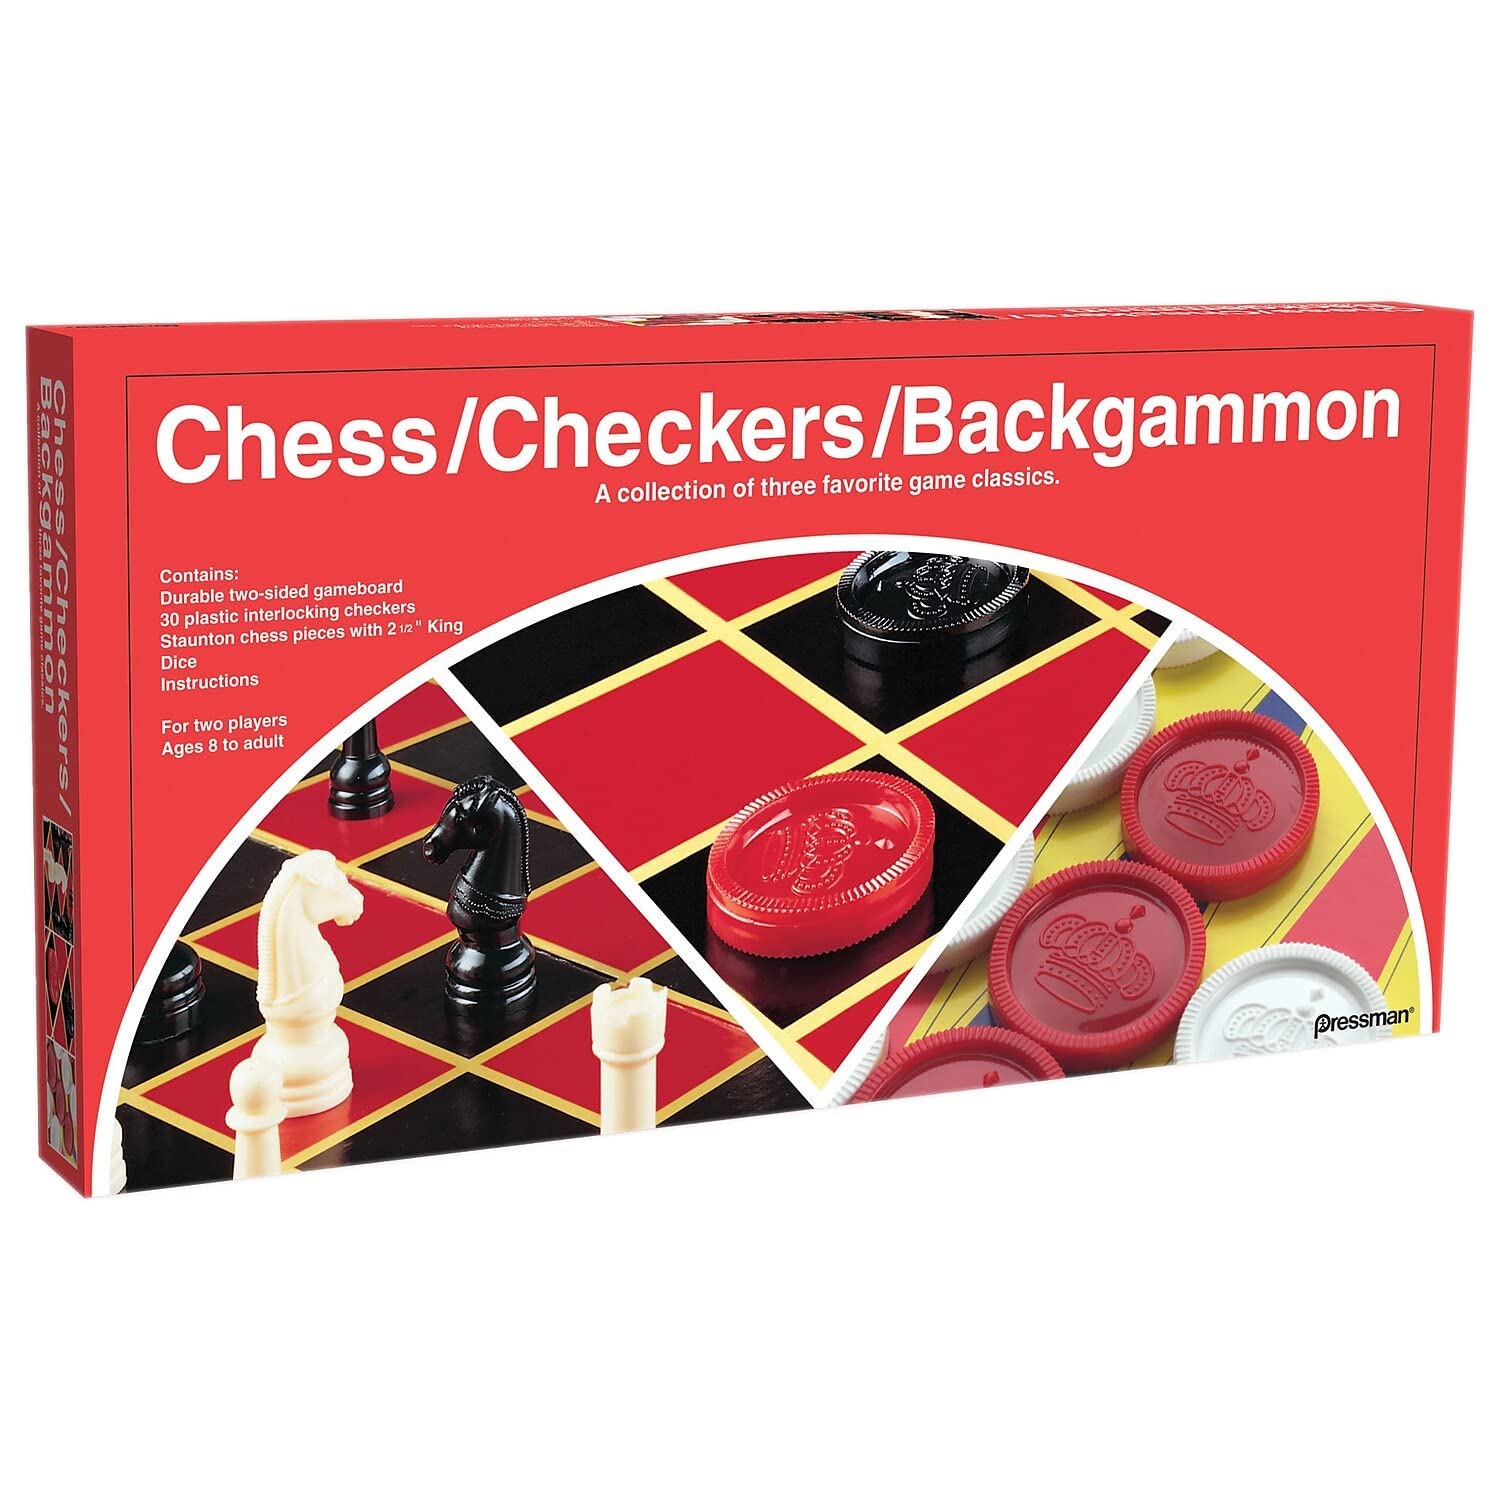 Pressman Chess / Checkers / Backgammon - 3 Games in One with Full Size Staunton Chess Pieces and Interlocking Checkers, 15.62 x 8.00 x 1.50 Inches